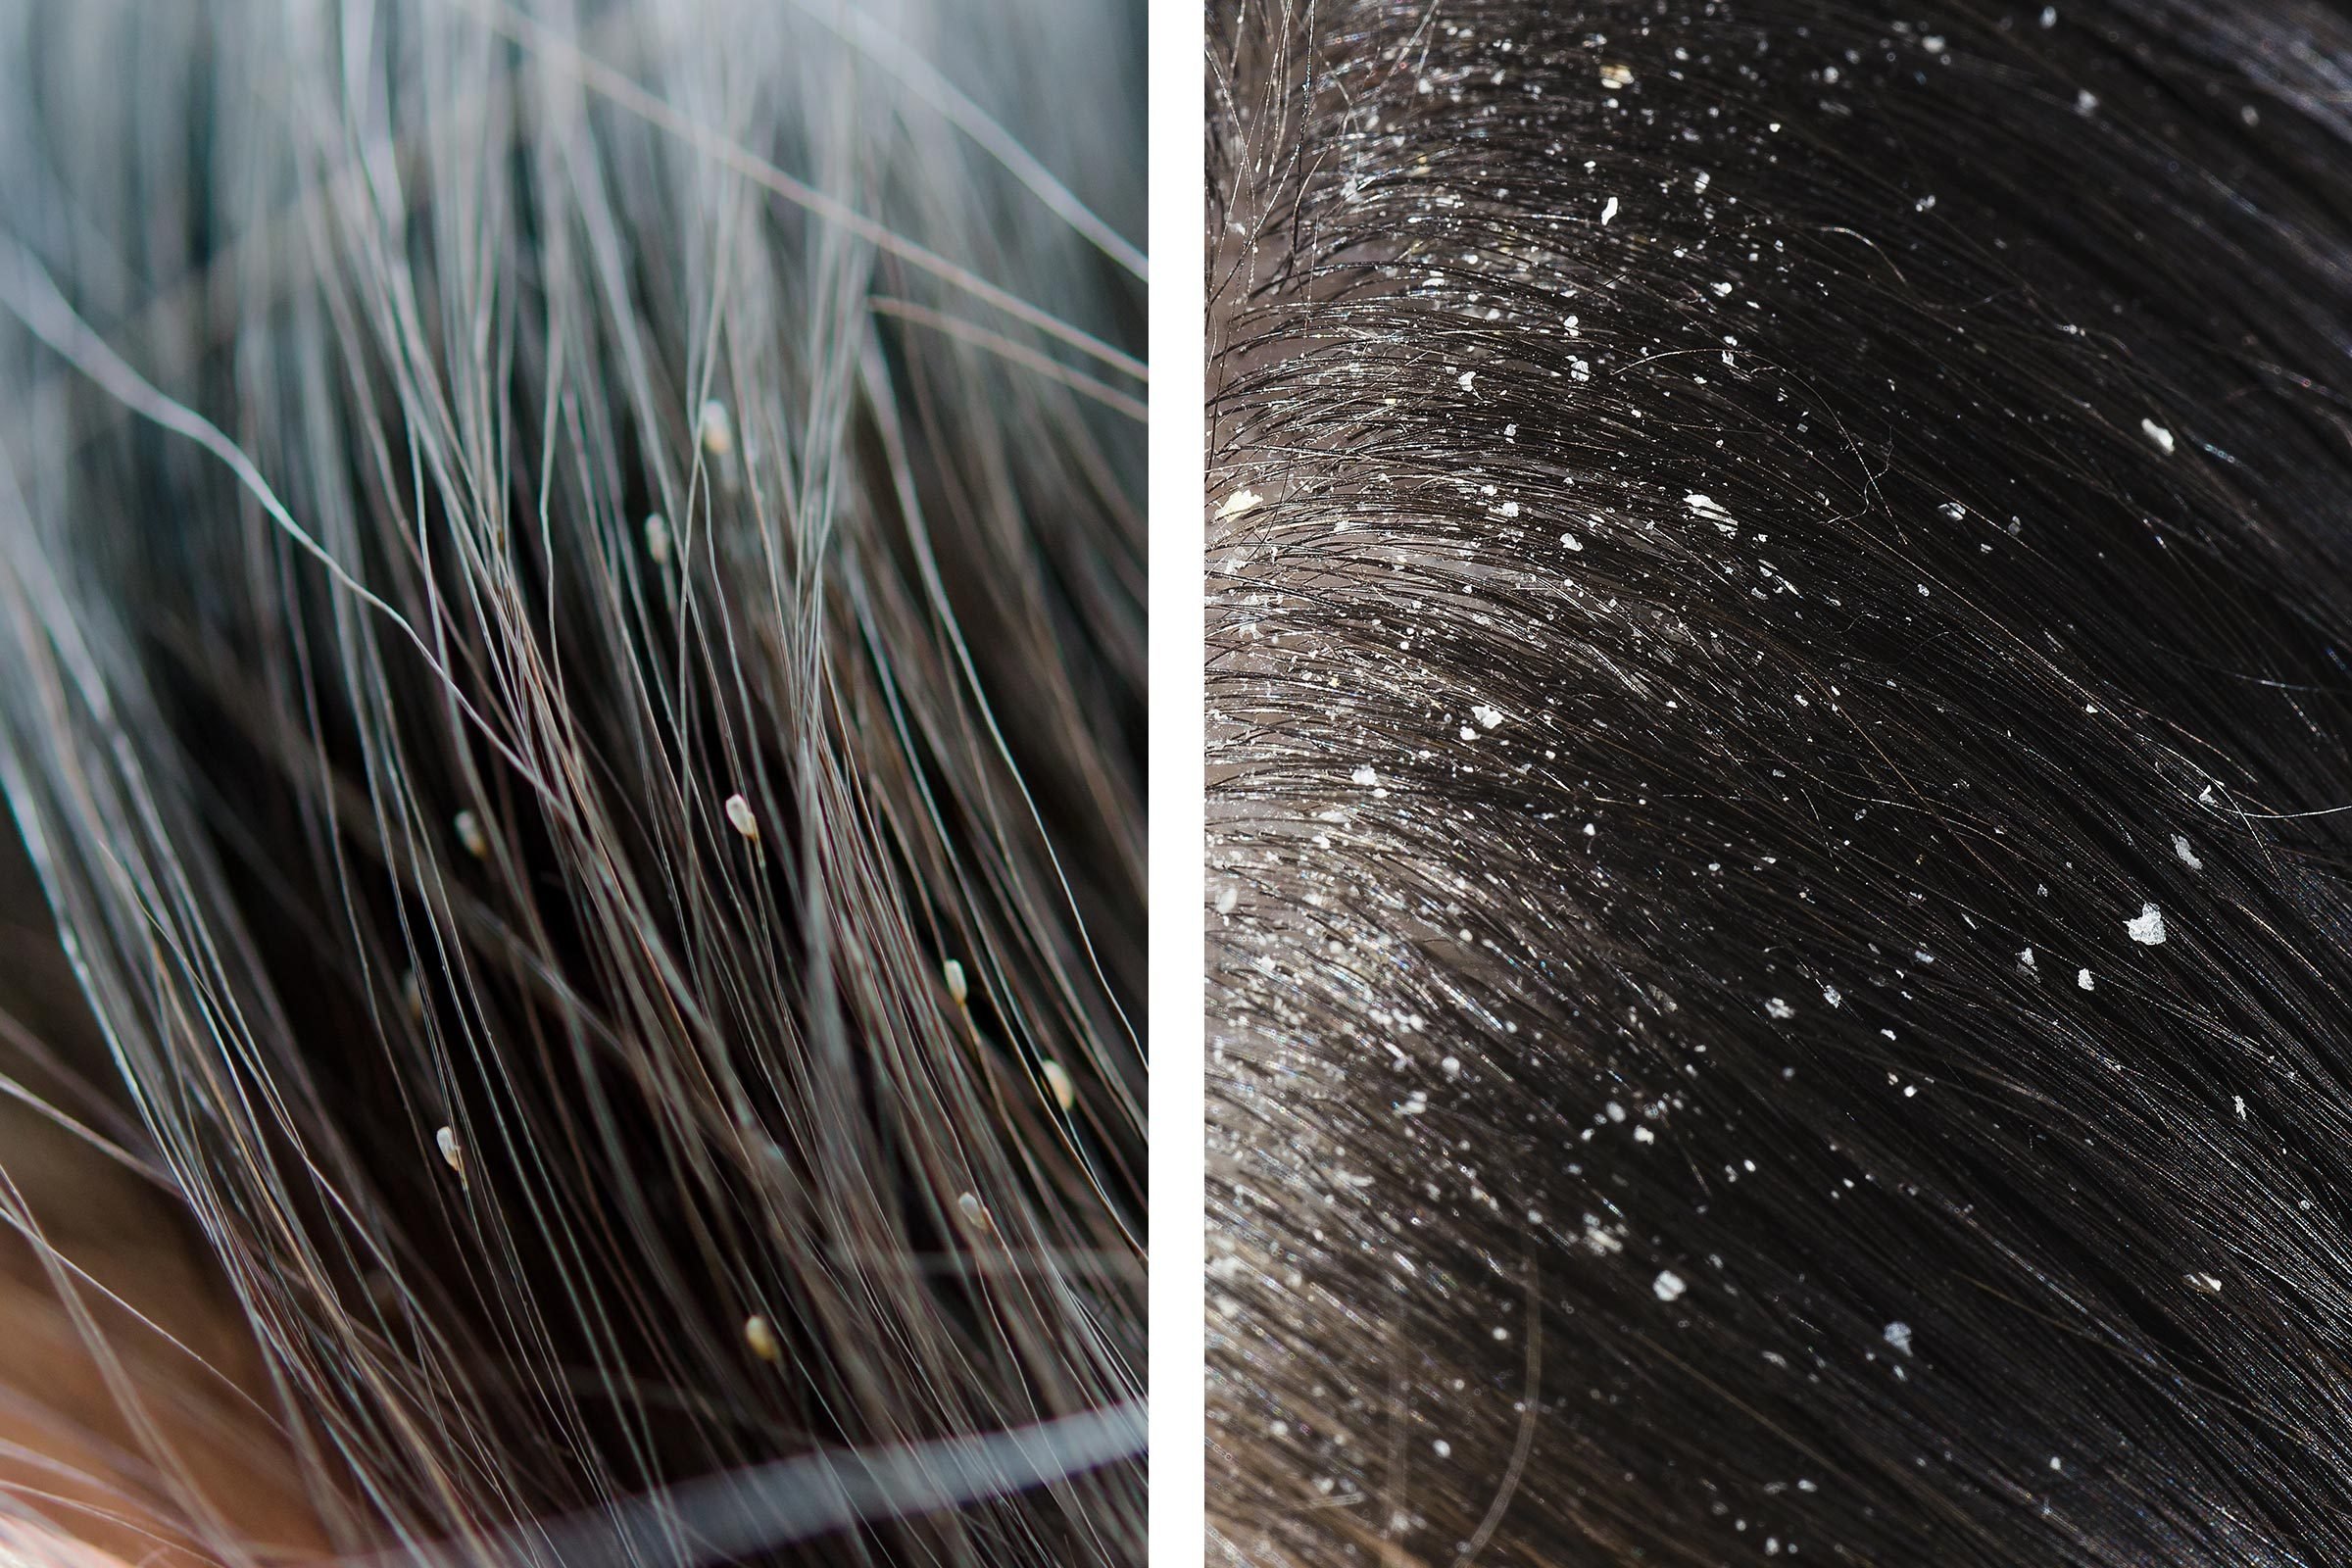 How to Spot the Difference Between Lice and Dandruff | Reader's Digest